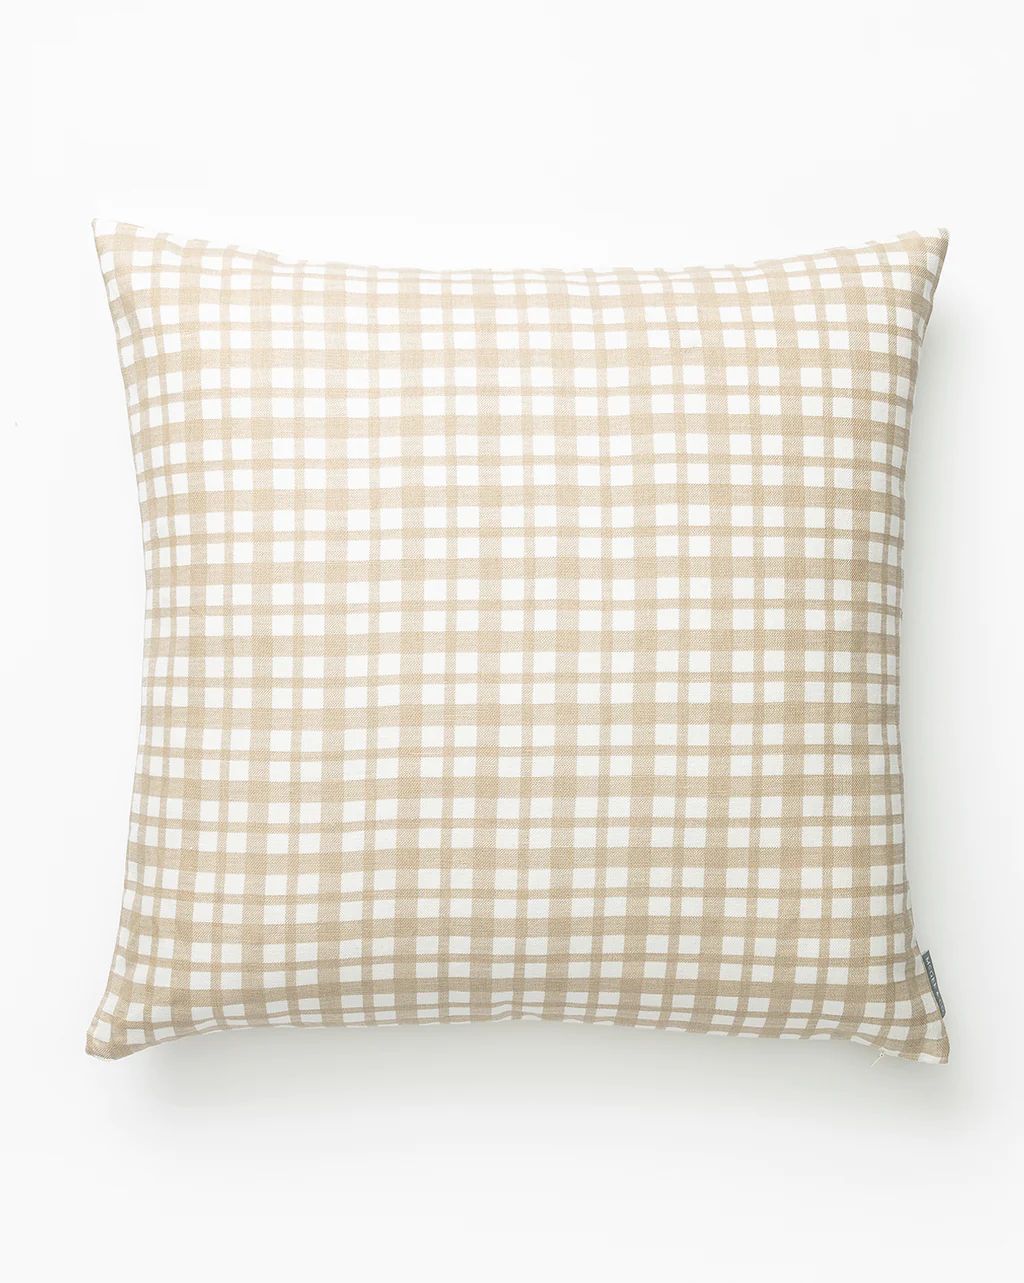 Edison Gingham Pillow Cover | McGee & Co.